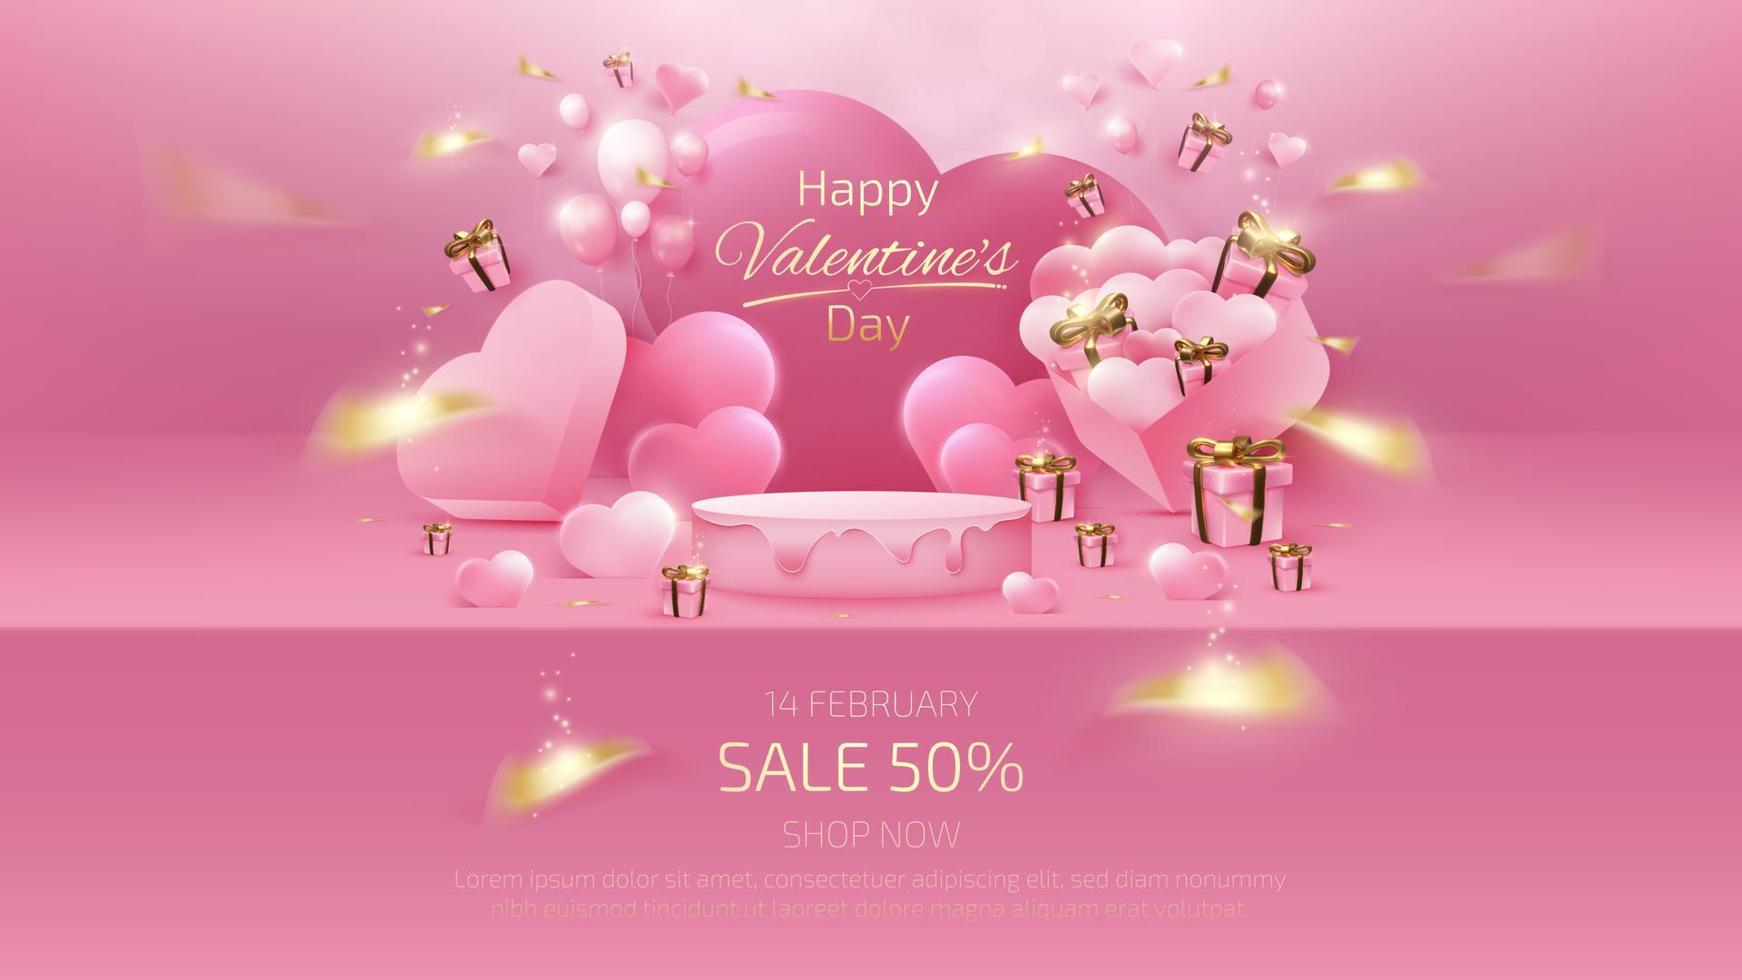 Valentine's day background and sale banner template with realistic 3d pink shelf and gift box elements, ribbon, balloon heart shaped with glitter light effects and bokeh. vector